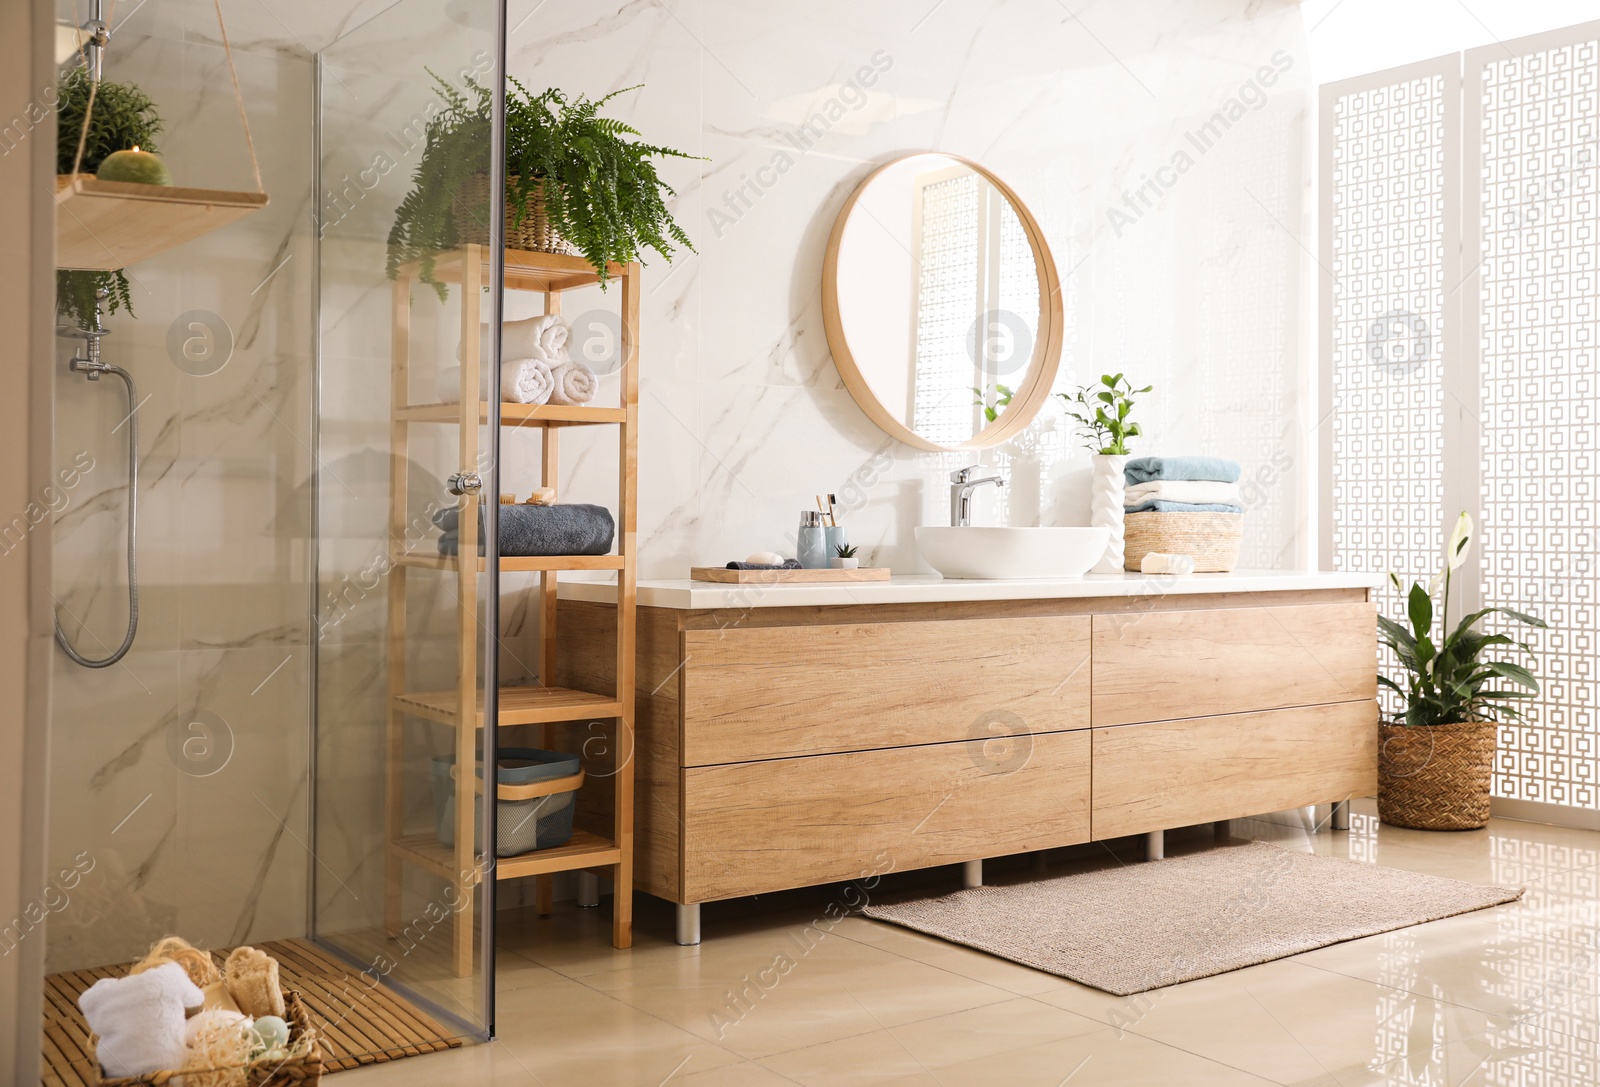 Photo of Stylish bathroom interior with countertop, mirror and shower stall. Design idea